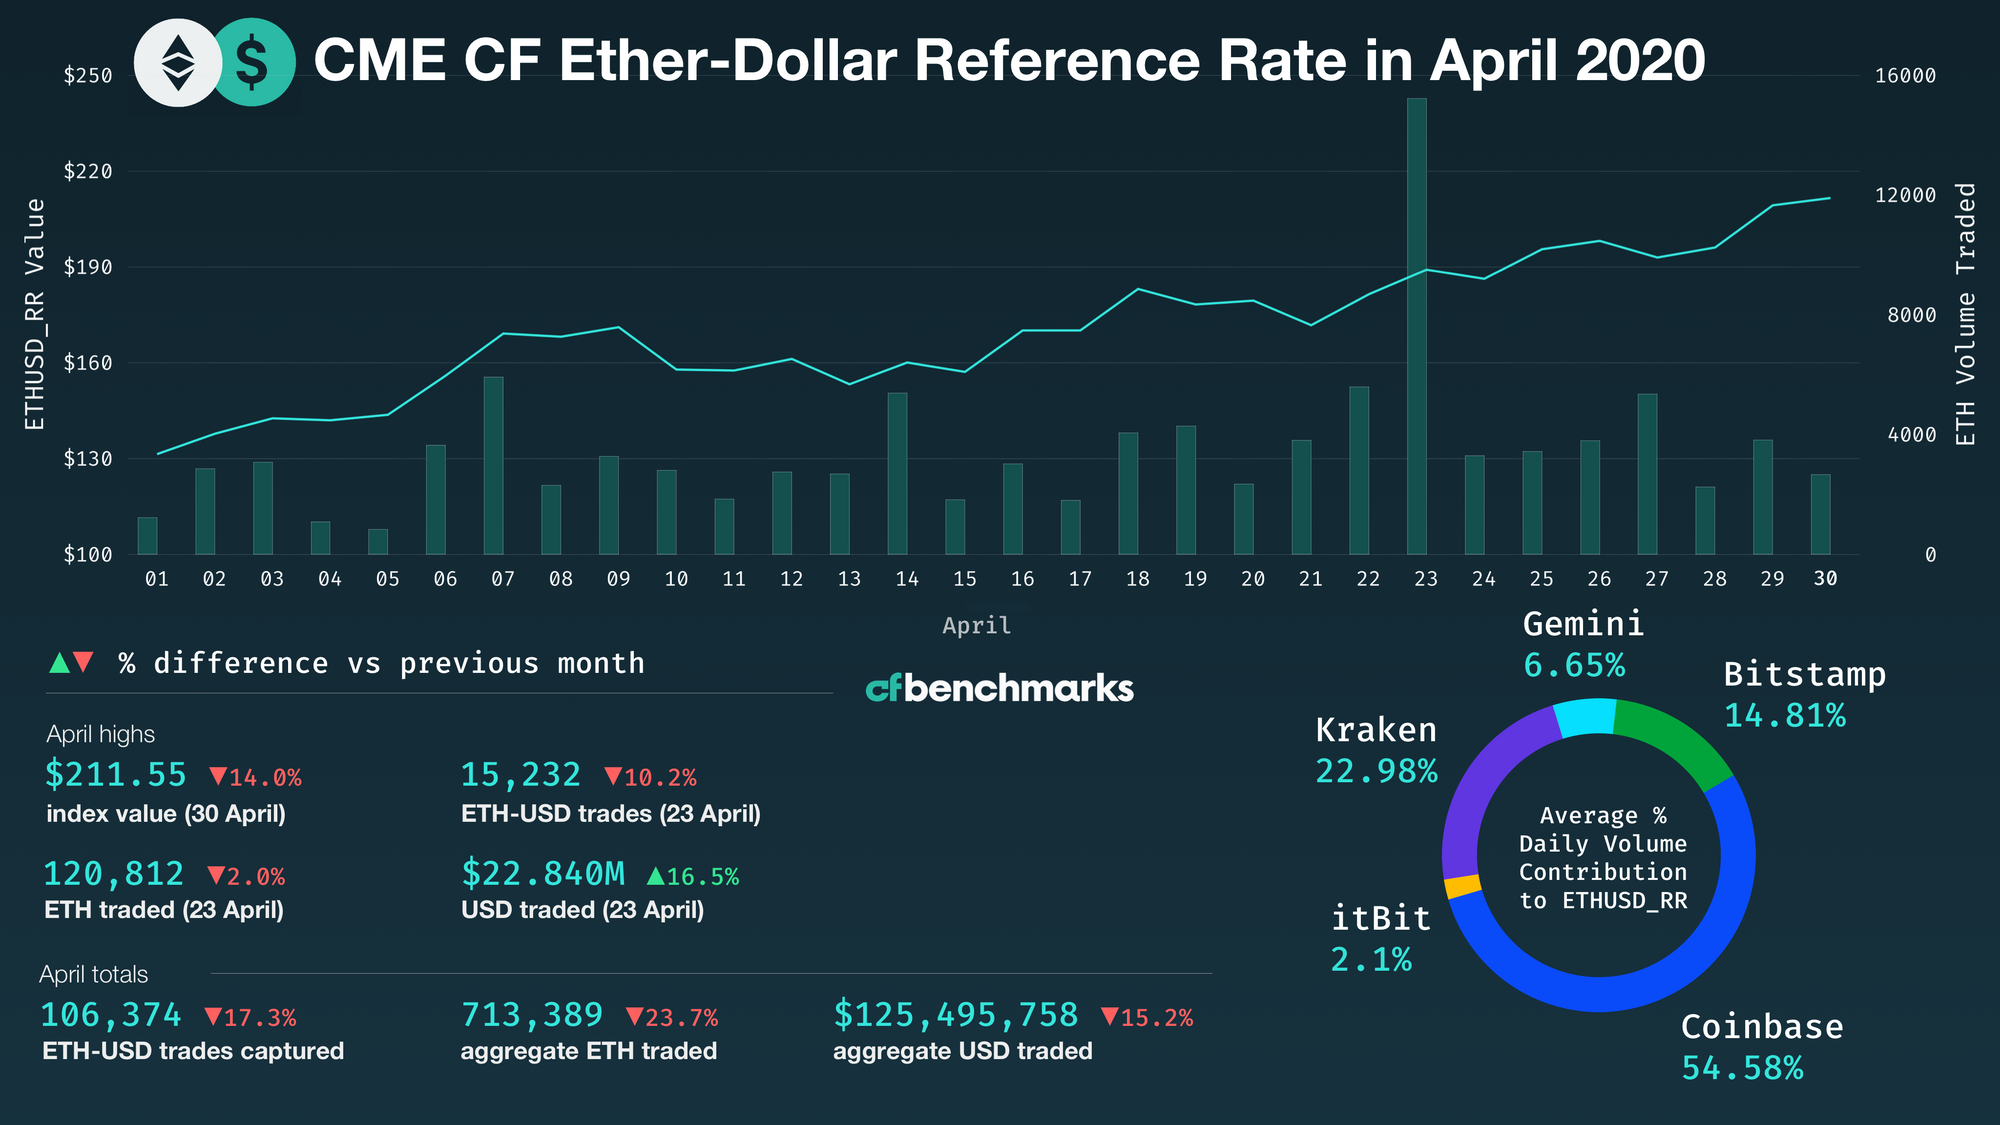 ETH returns 61% in April, the best monthly return since May 2019 (64%), recovering most of its March losses